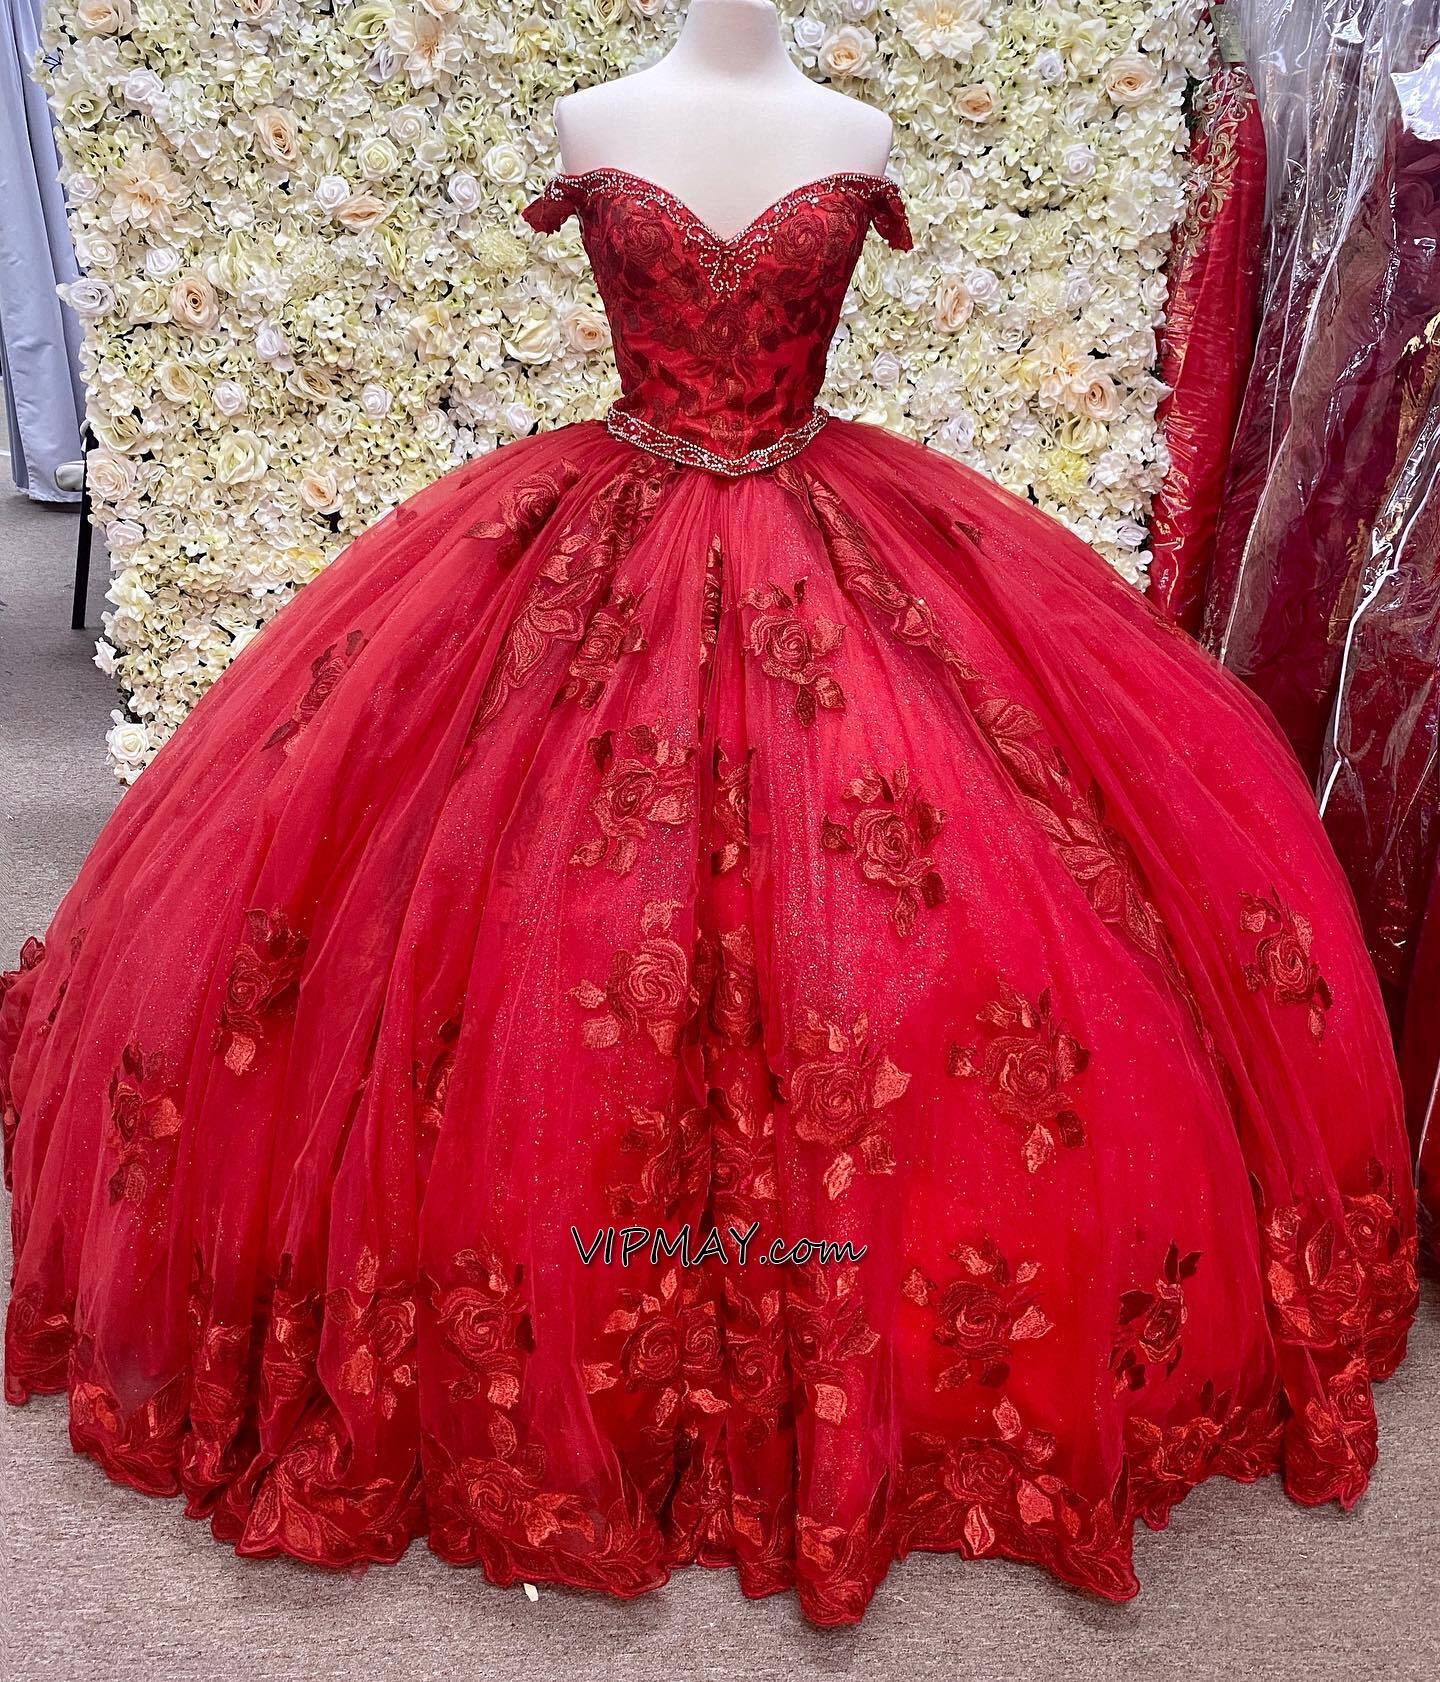 wine colored quinceanera dress,floral two piece quinceanera dress,two piece modern quinceanera dress,quinceanera dress lace puffy elegant,quinceanera dress with short train,corset quinceanera dress,lace back up quinceanera dress,